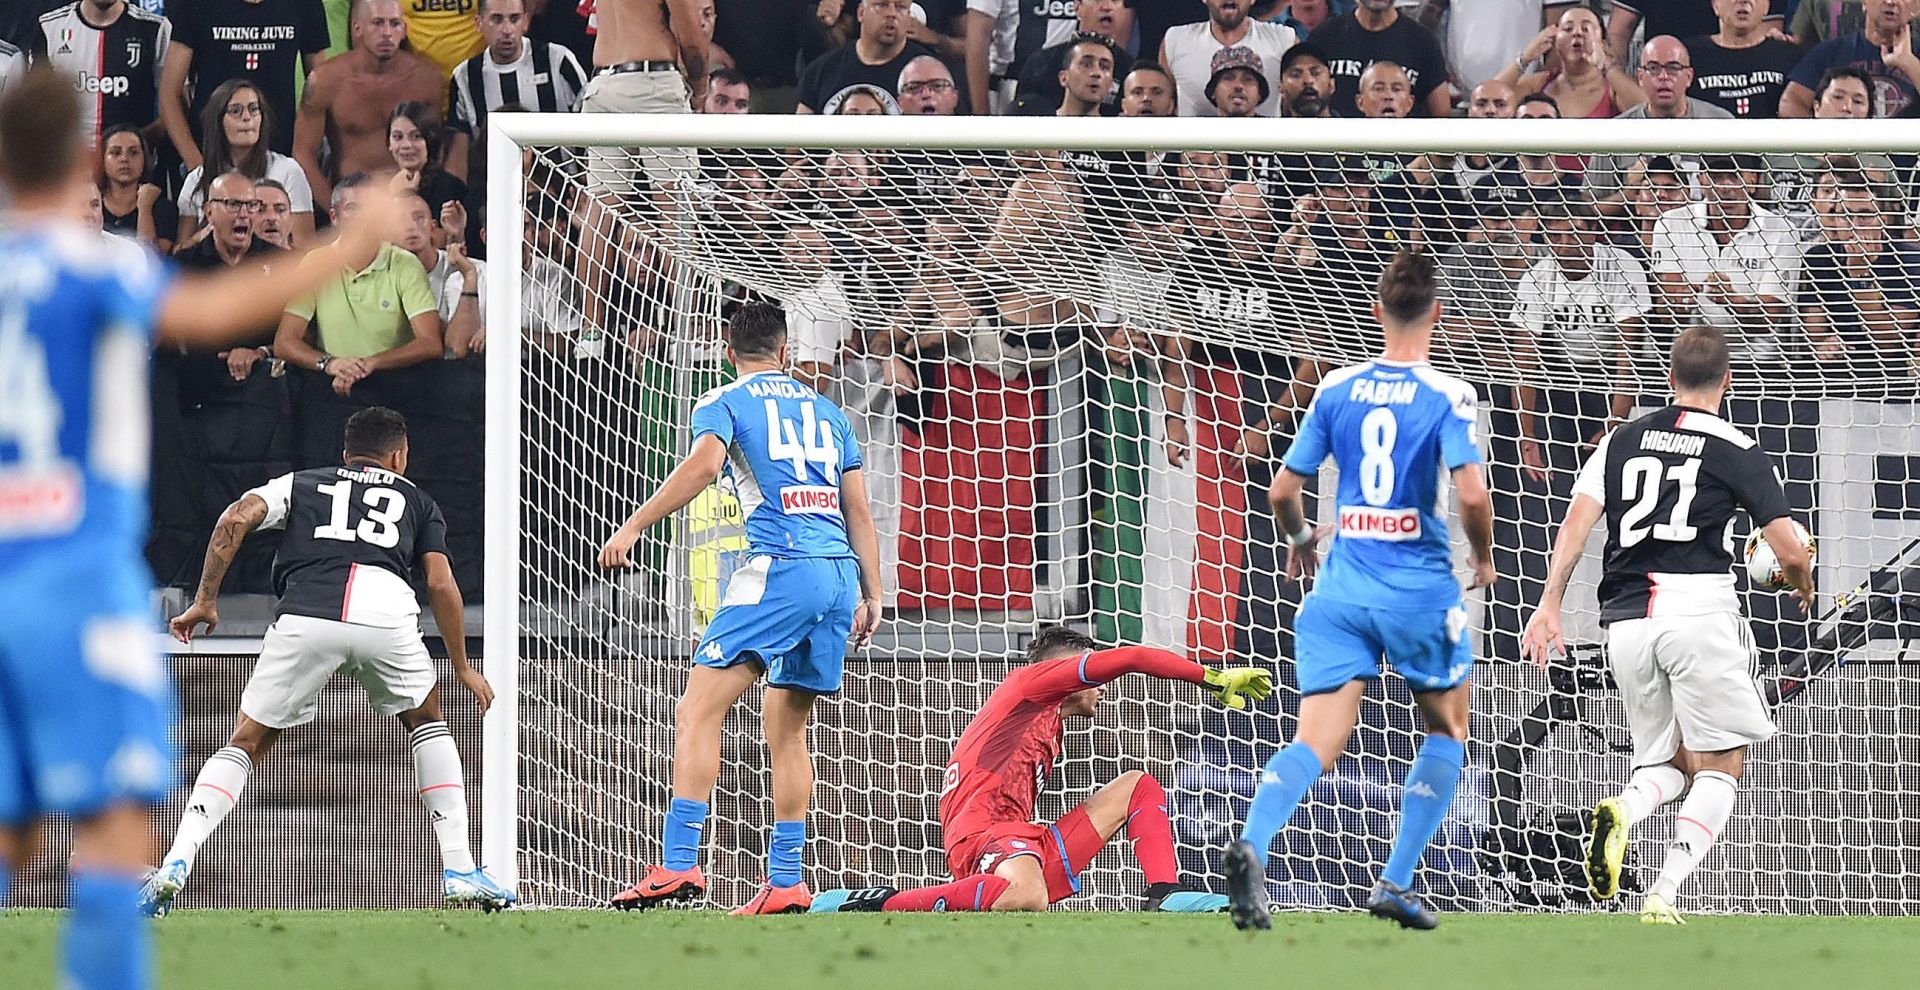 epa07808449 Juventus' Danilo (L) scores the opening goal during the Italian Serie A soccer match Juventus FC vs SSC Napoli at the Allianz Stadium in Turin, Italy, 31 August 2019.  EPA/ALESSANDRO DI MARCO